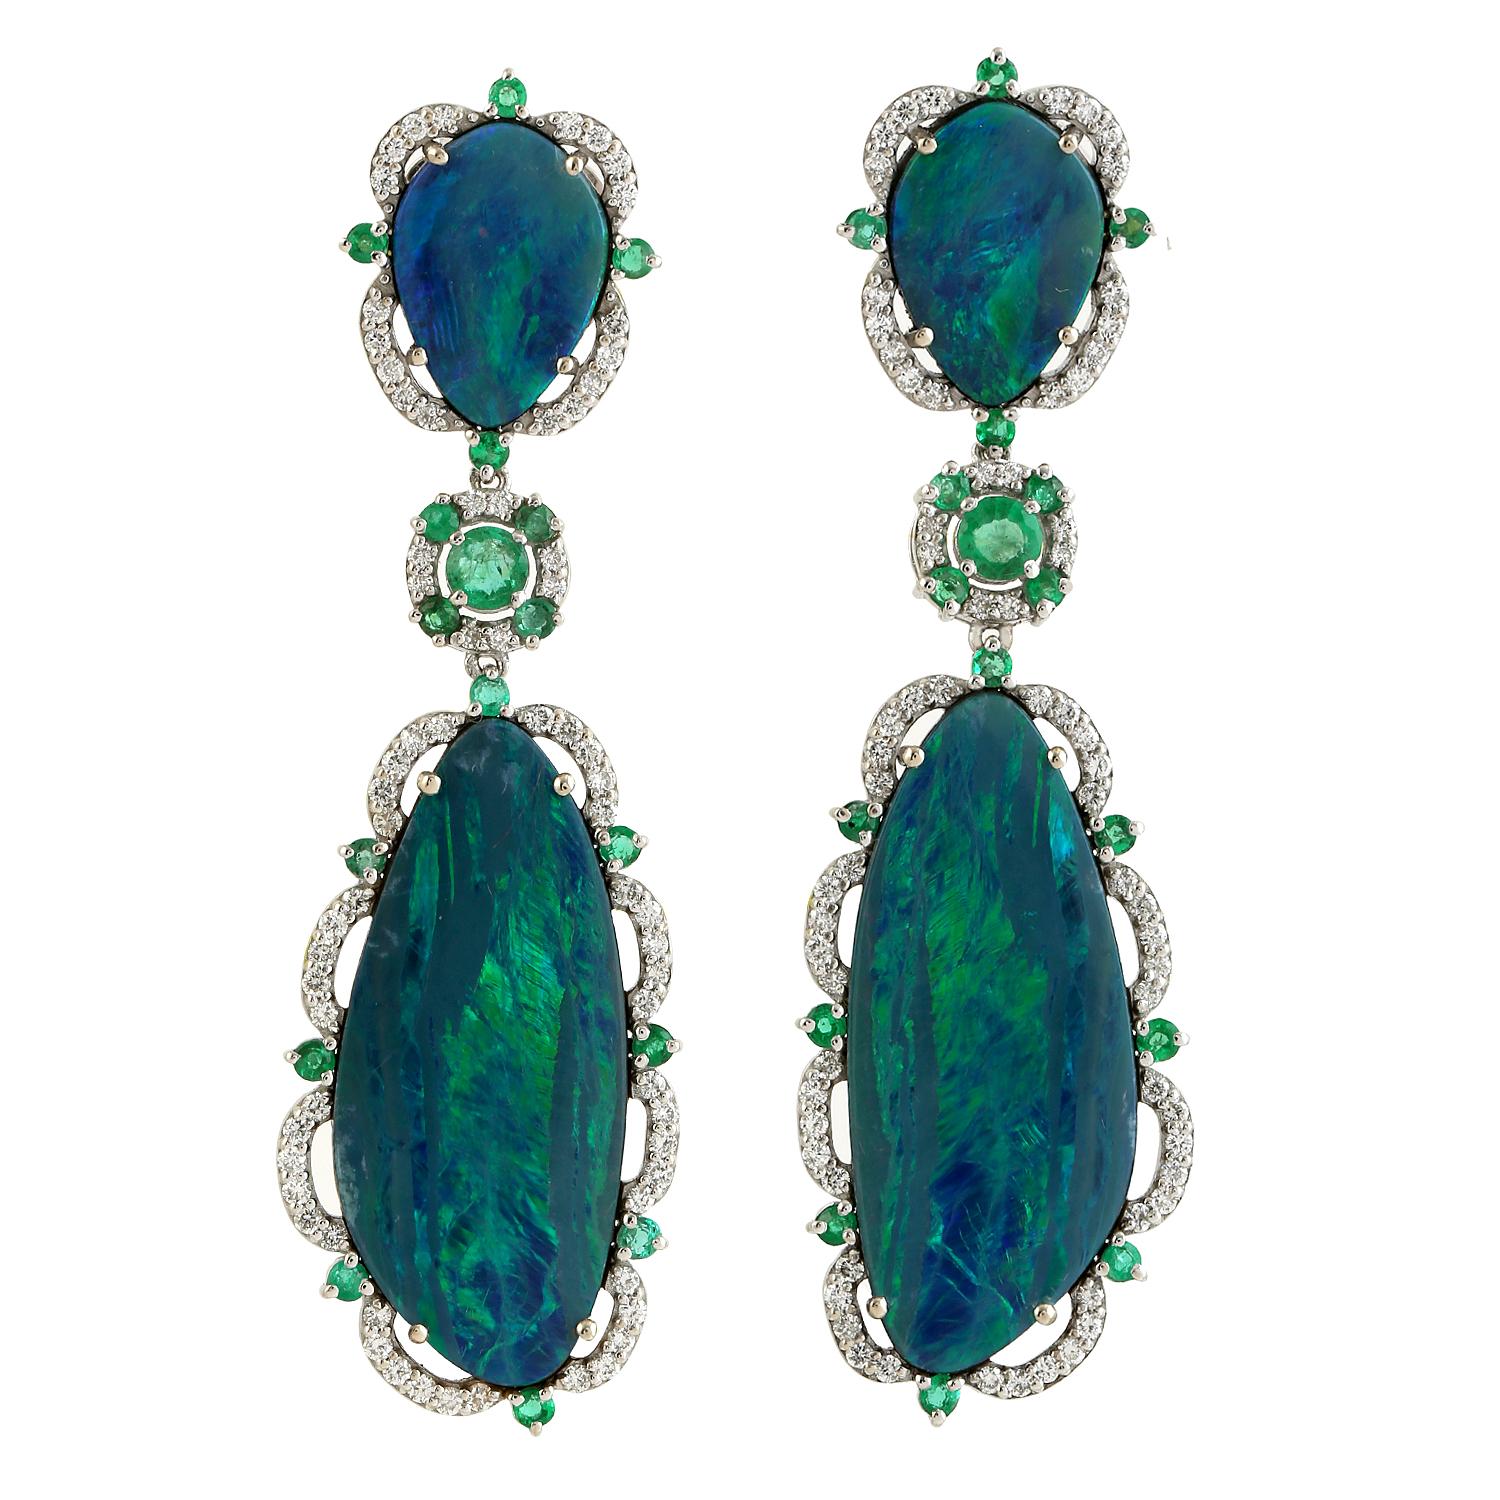 Mixed Cut Multi Shaped Doublet Opal Earrings Accented With Diamonds Made In 18k White Gold For Sale